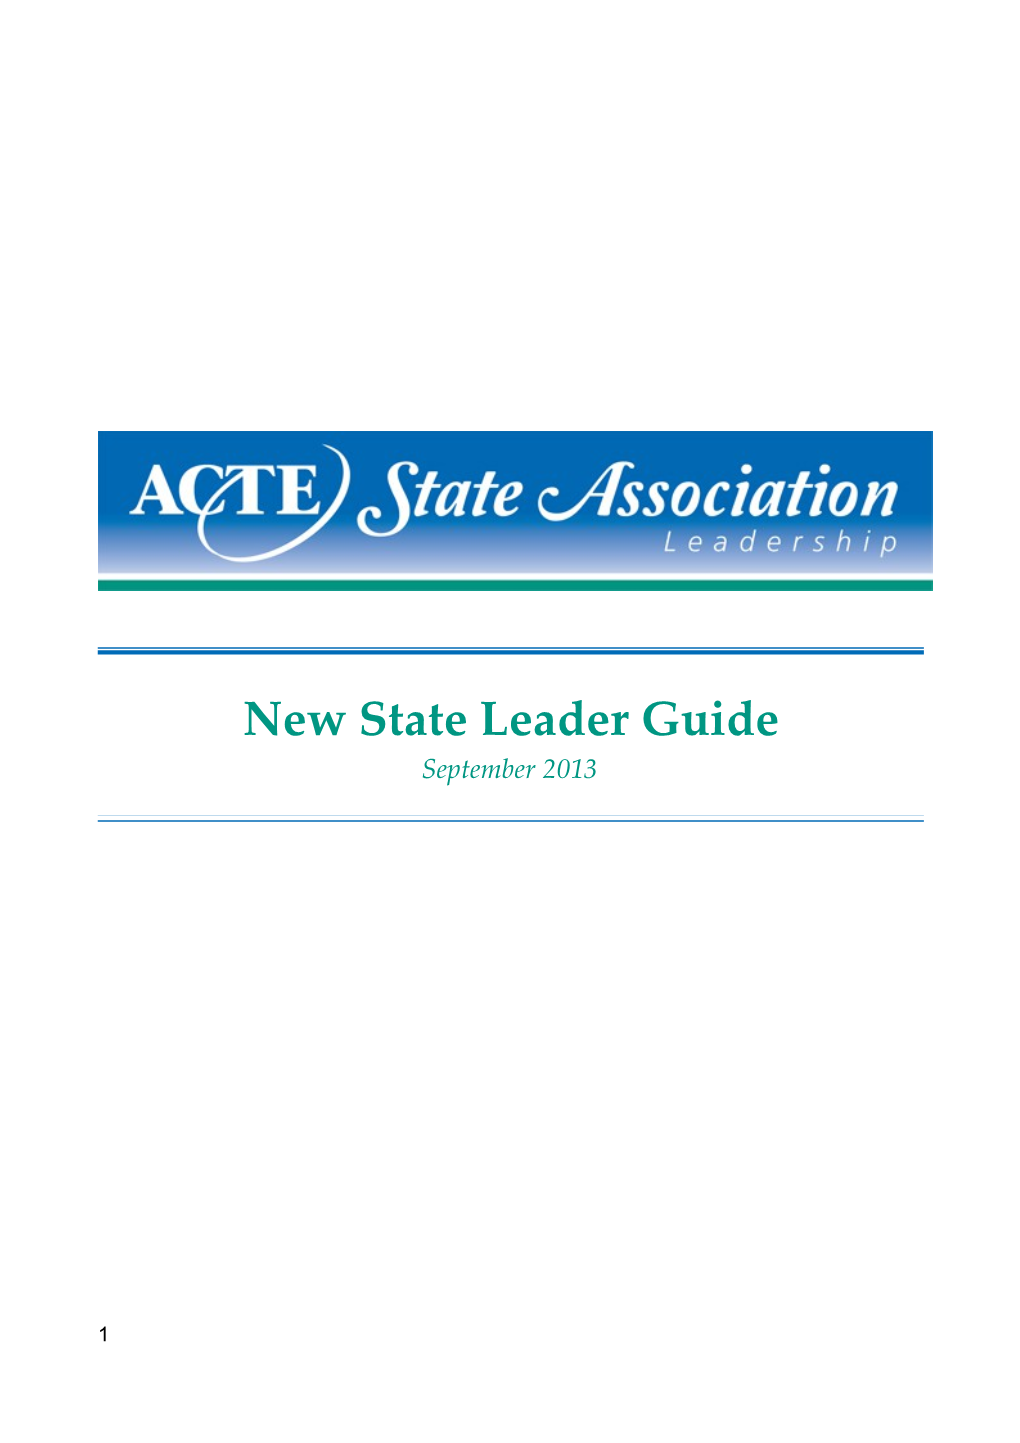 New State Leader Guide